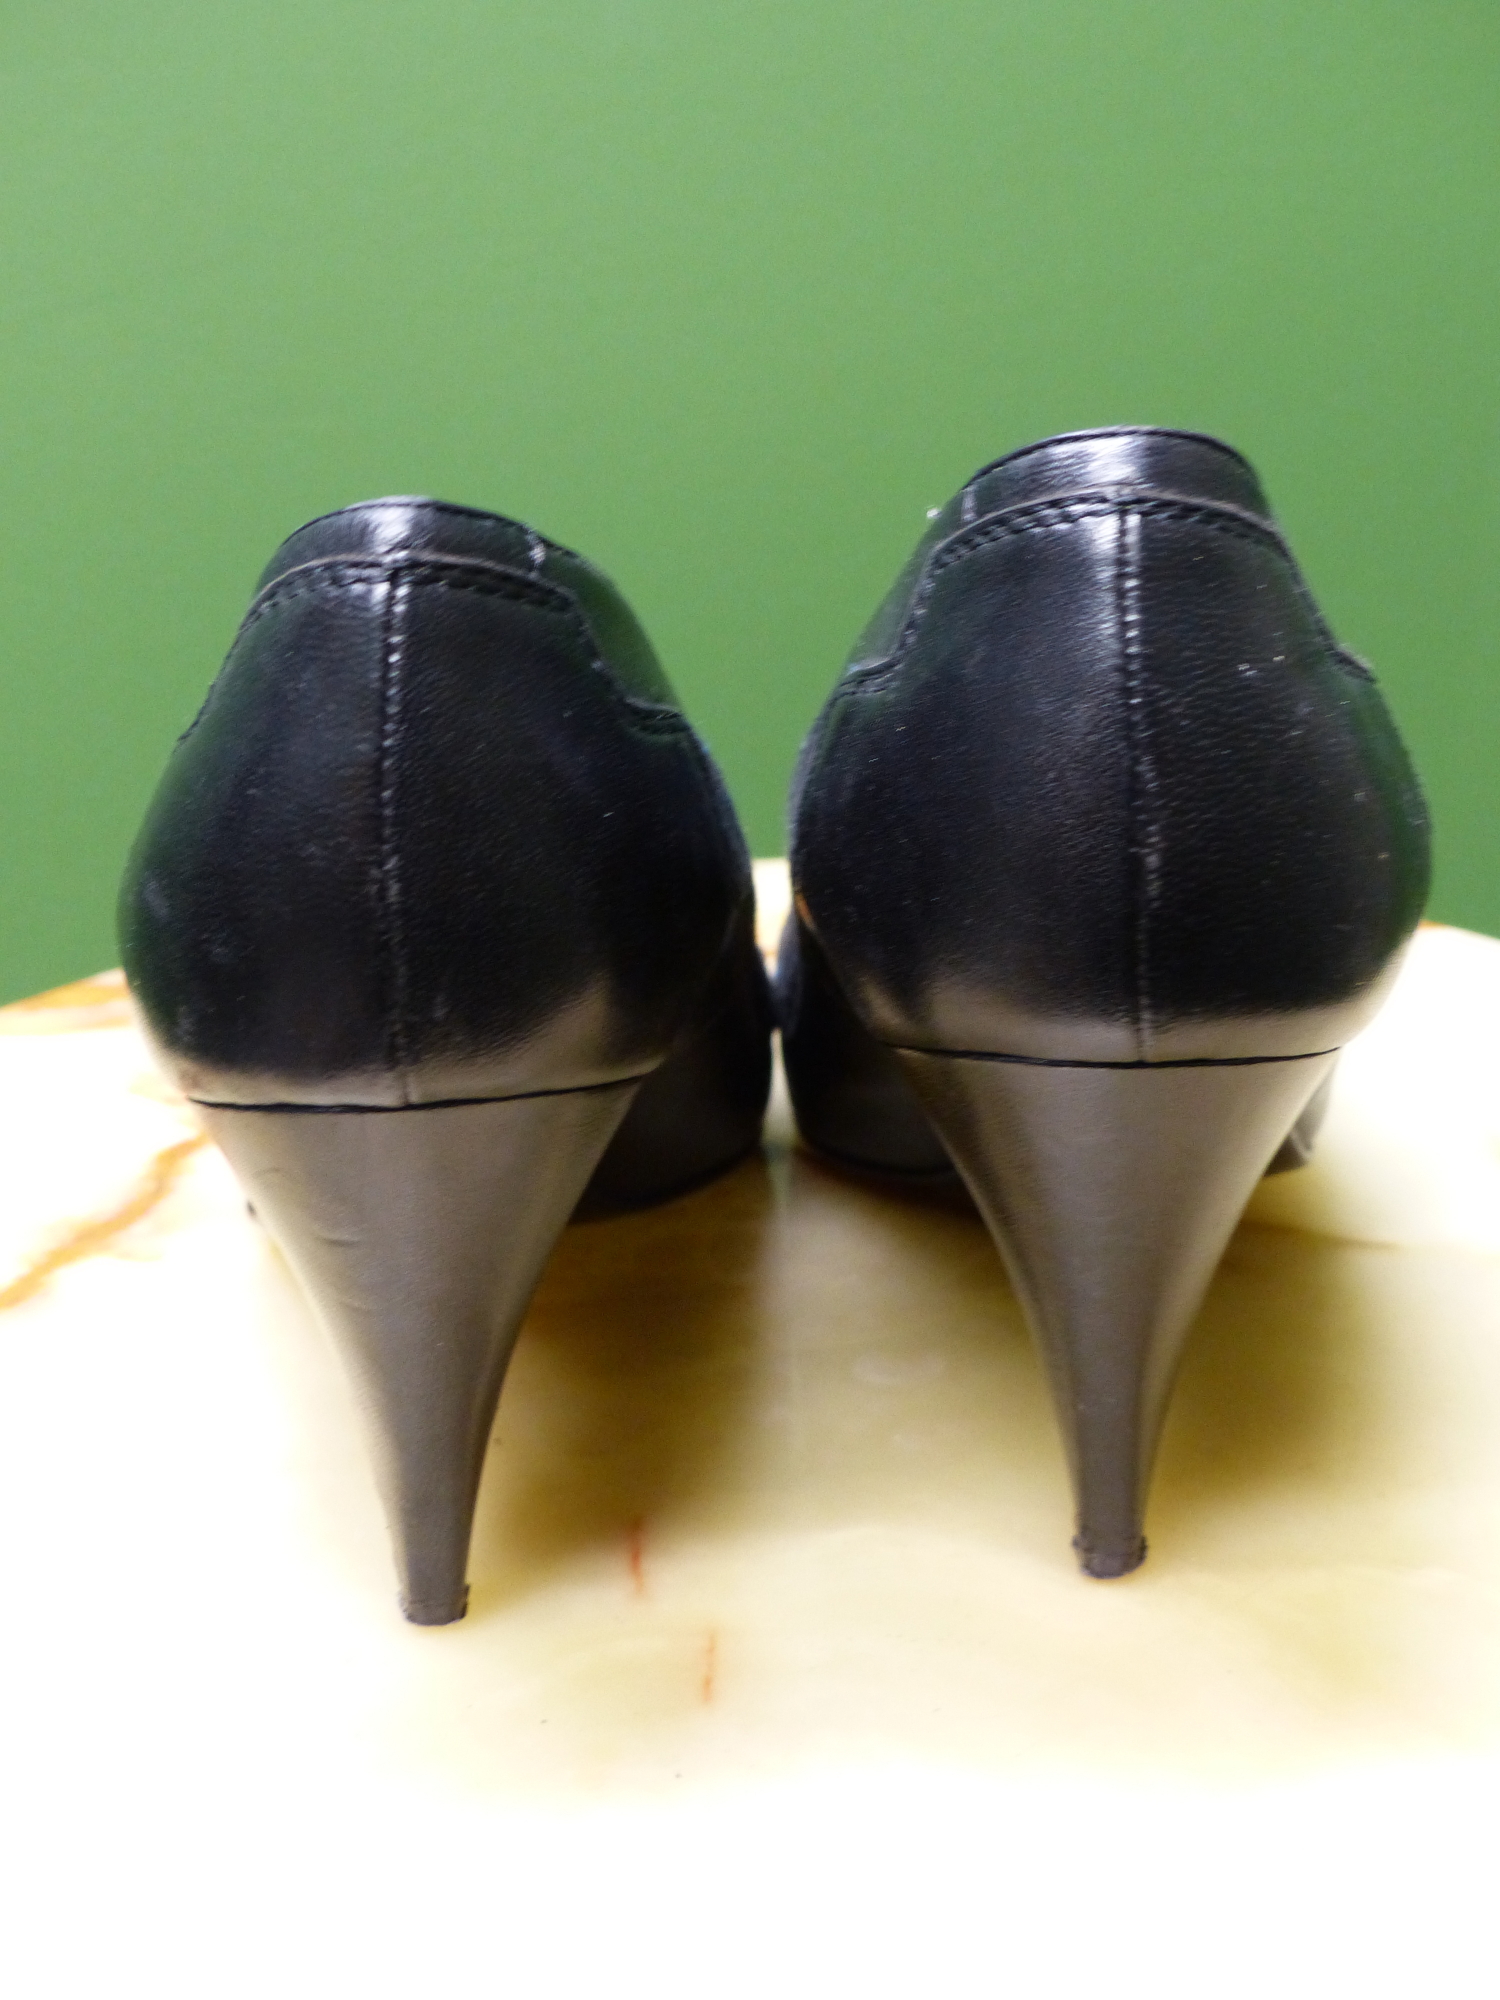 SHOES. GIANNI VERSACE ITALIAN BLACK WITH NAVY STITCH HEELS. EURO SIZE 39. HEEL HEIGHT 8cm. - Image 2 of 8